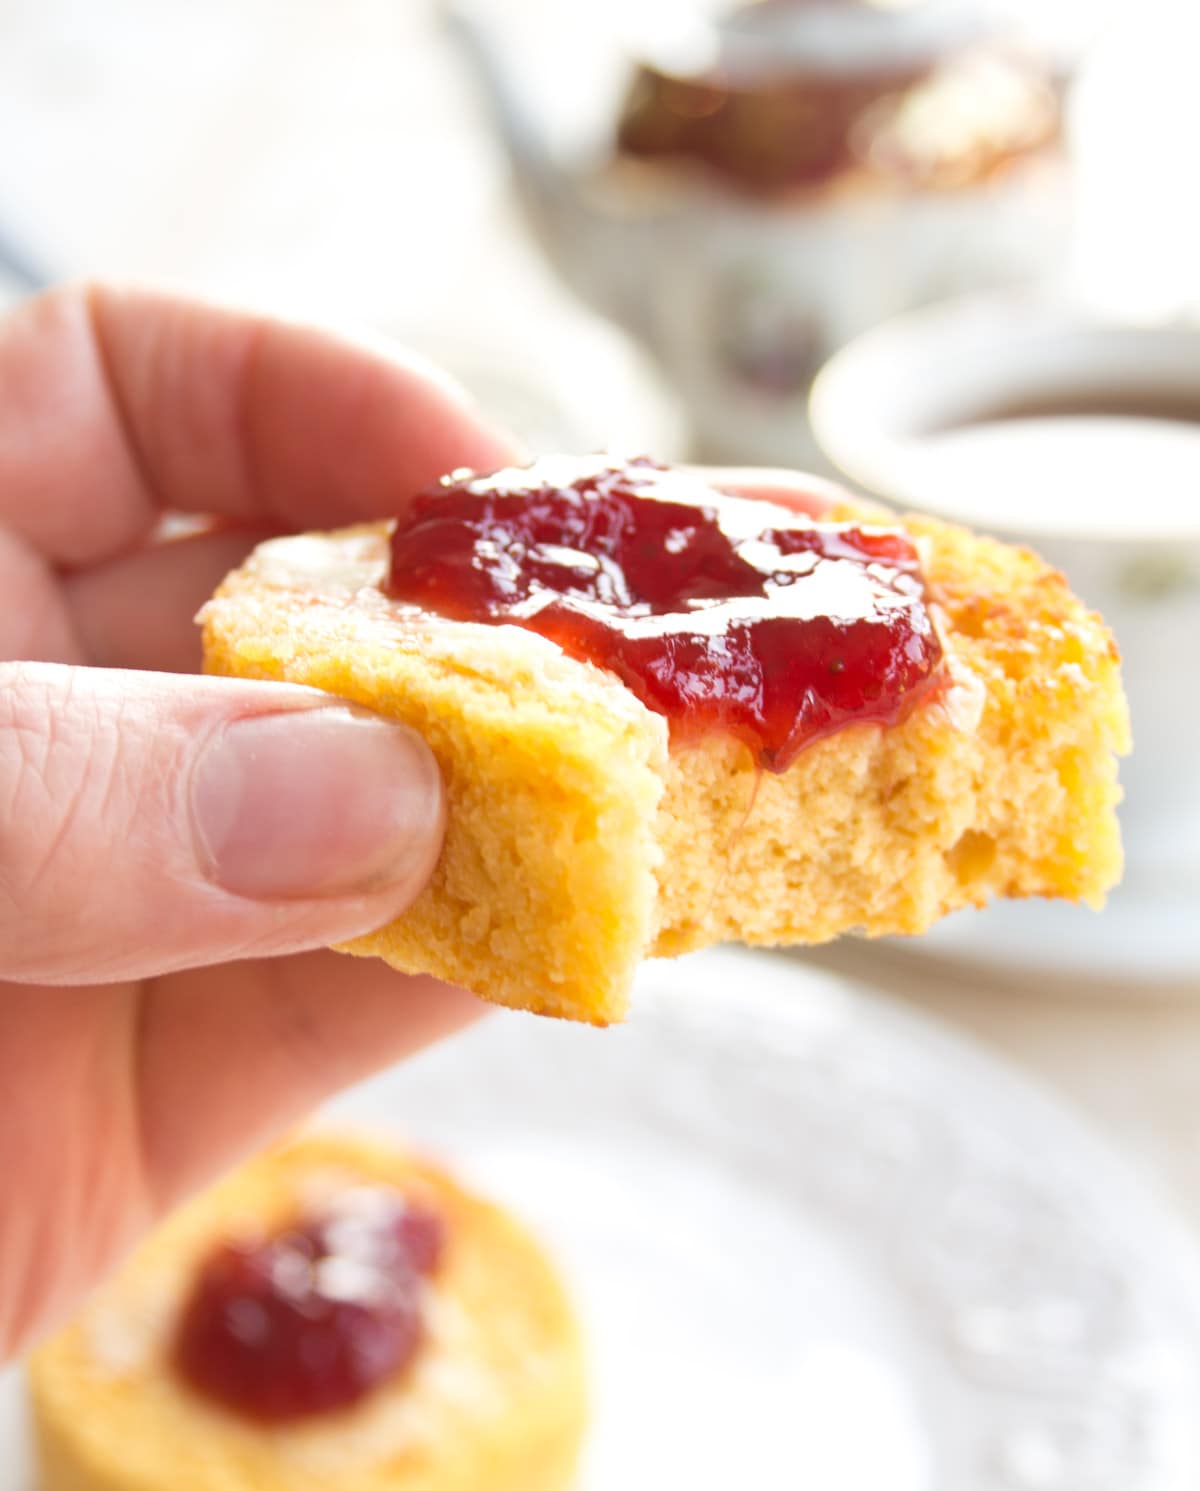 An English muffin topped with strawberry jam.